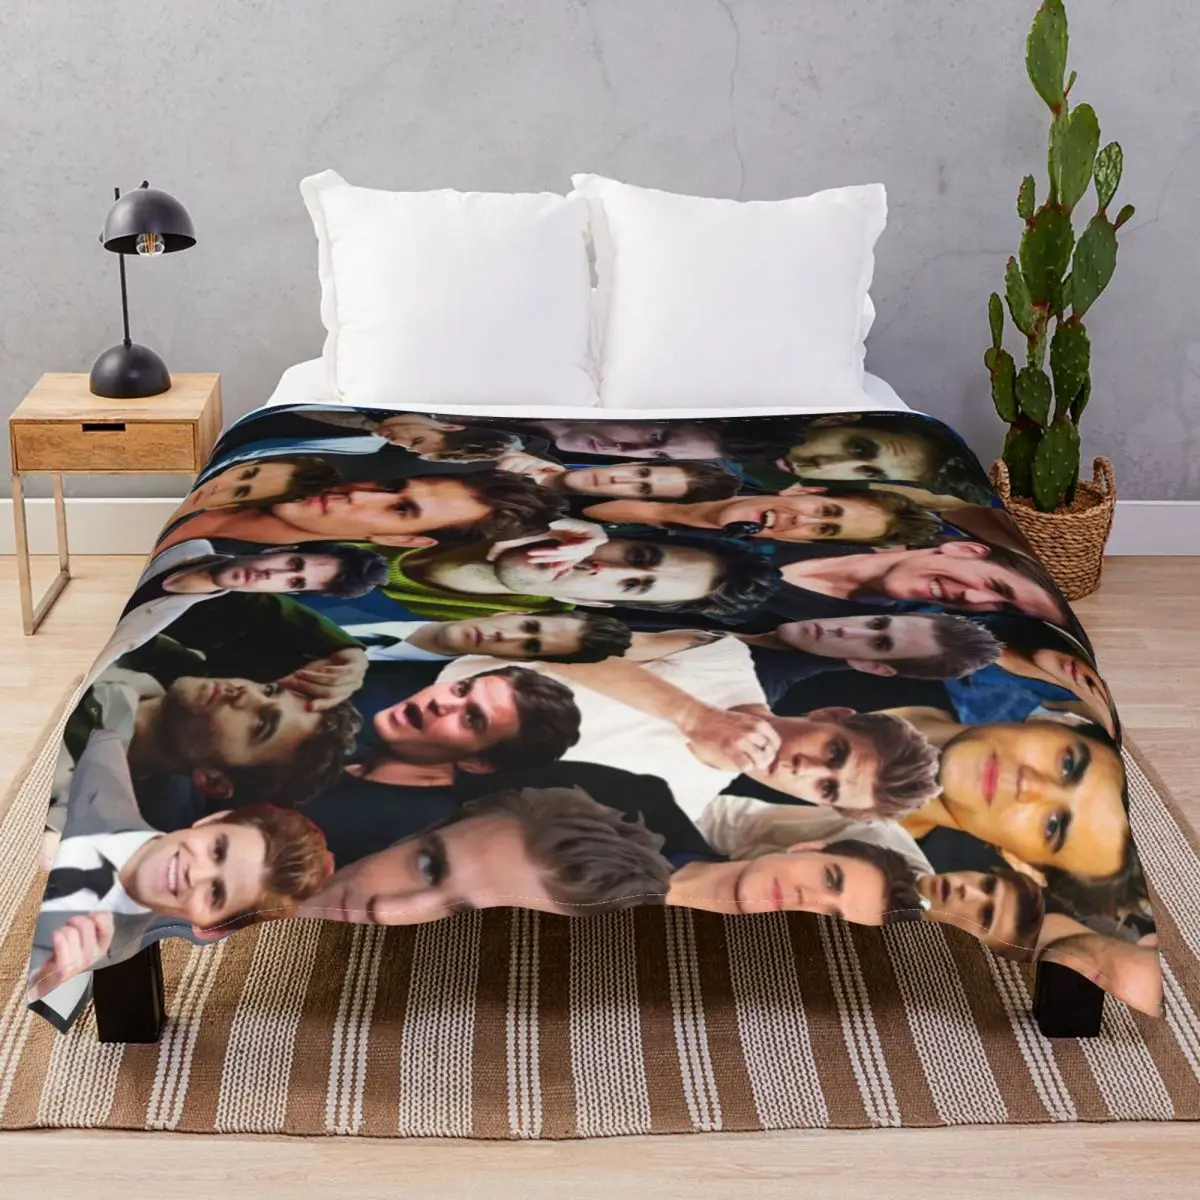 Paul Wesley Photo Collage Blankets Fleece Summer Multi-function Throw Blanket for Bedding Home Couch Camp Cinema